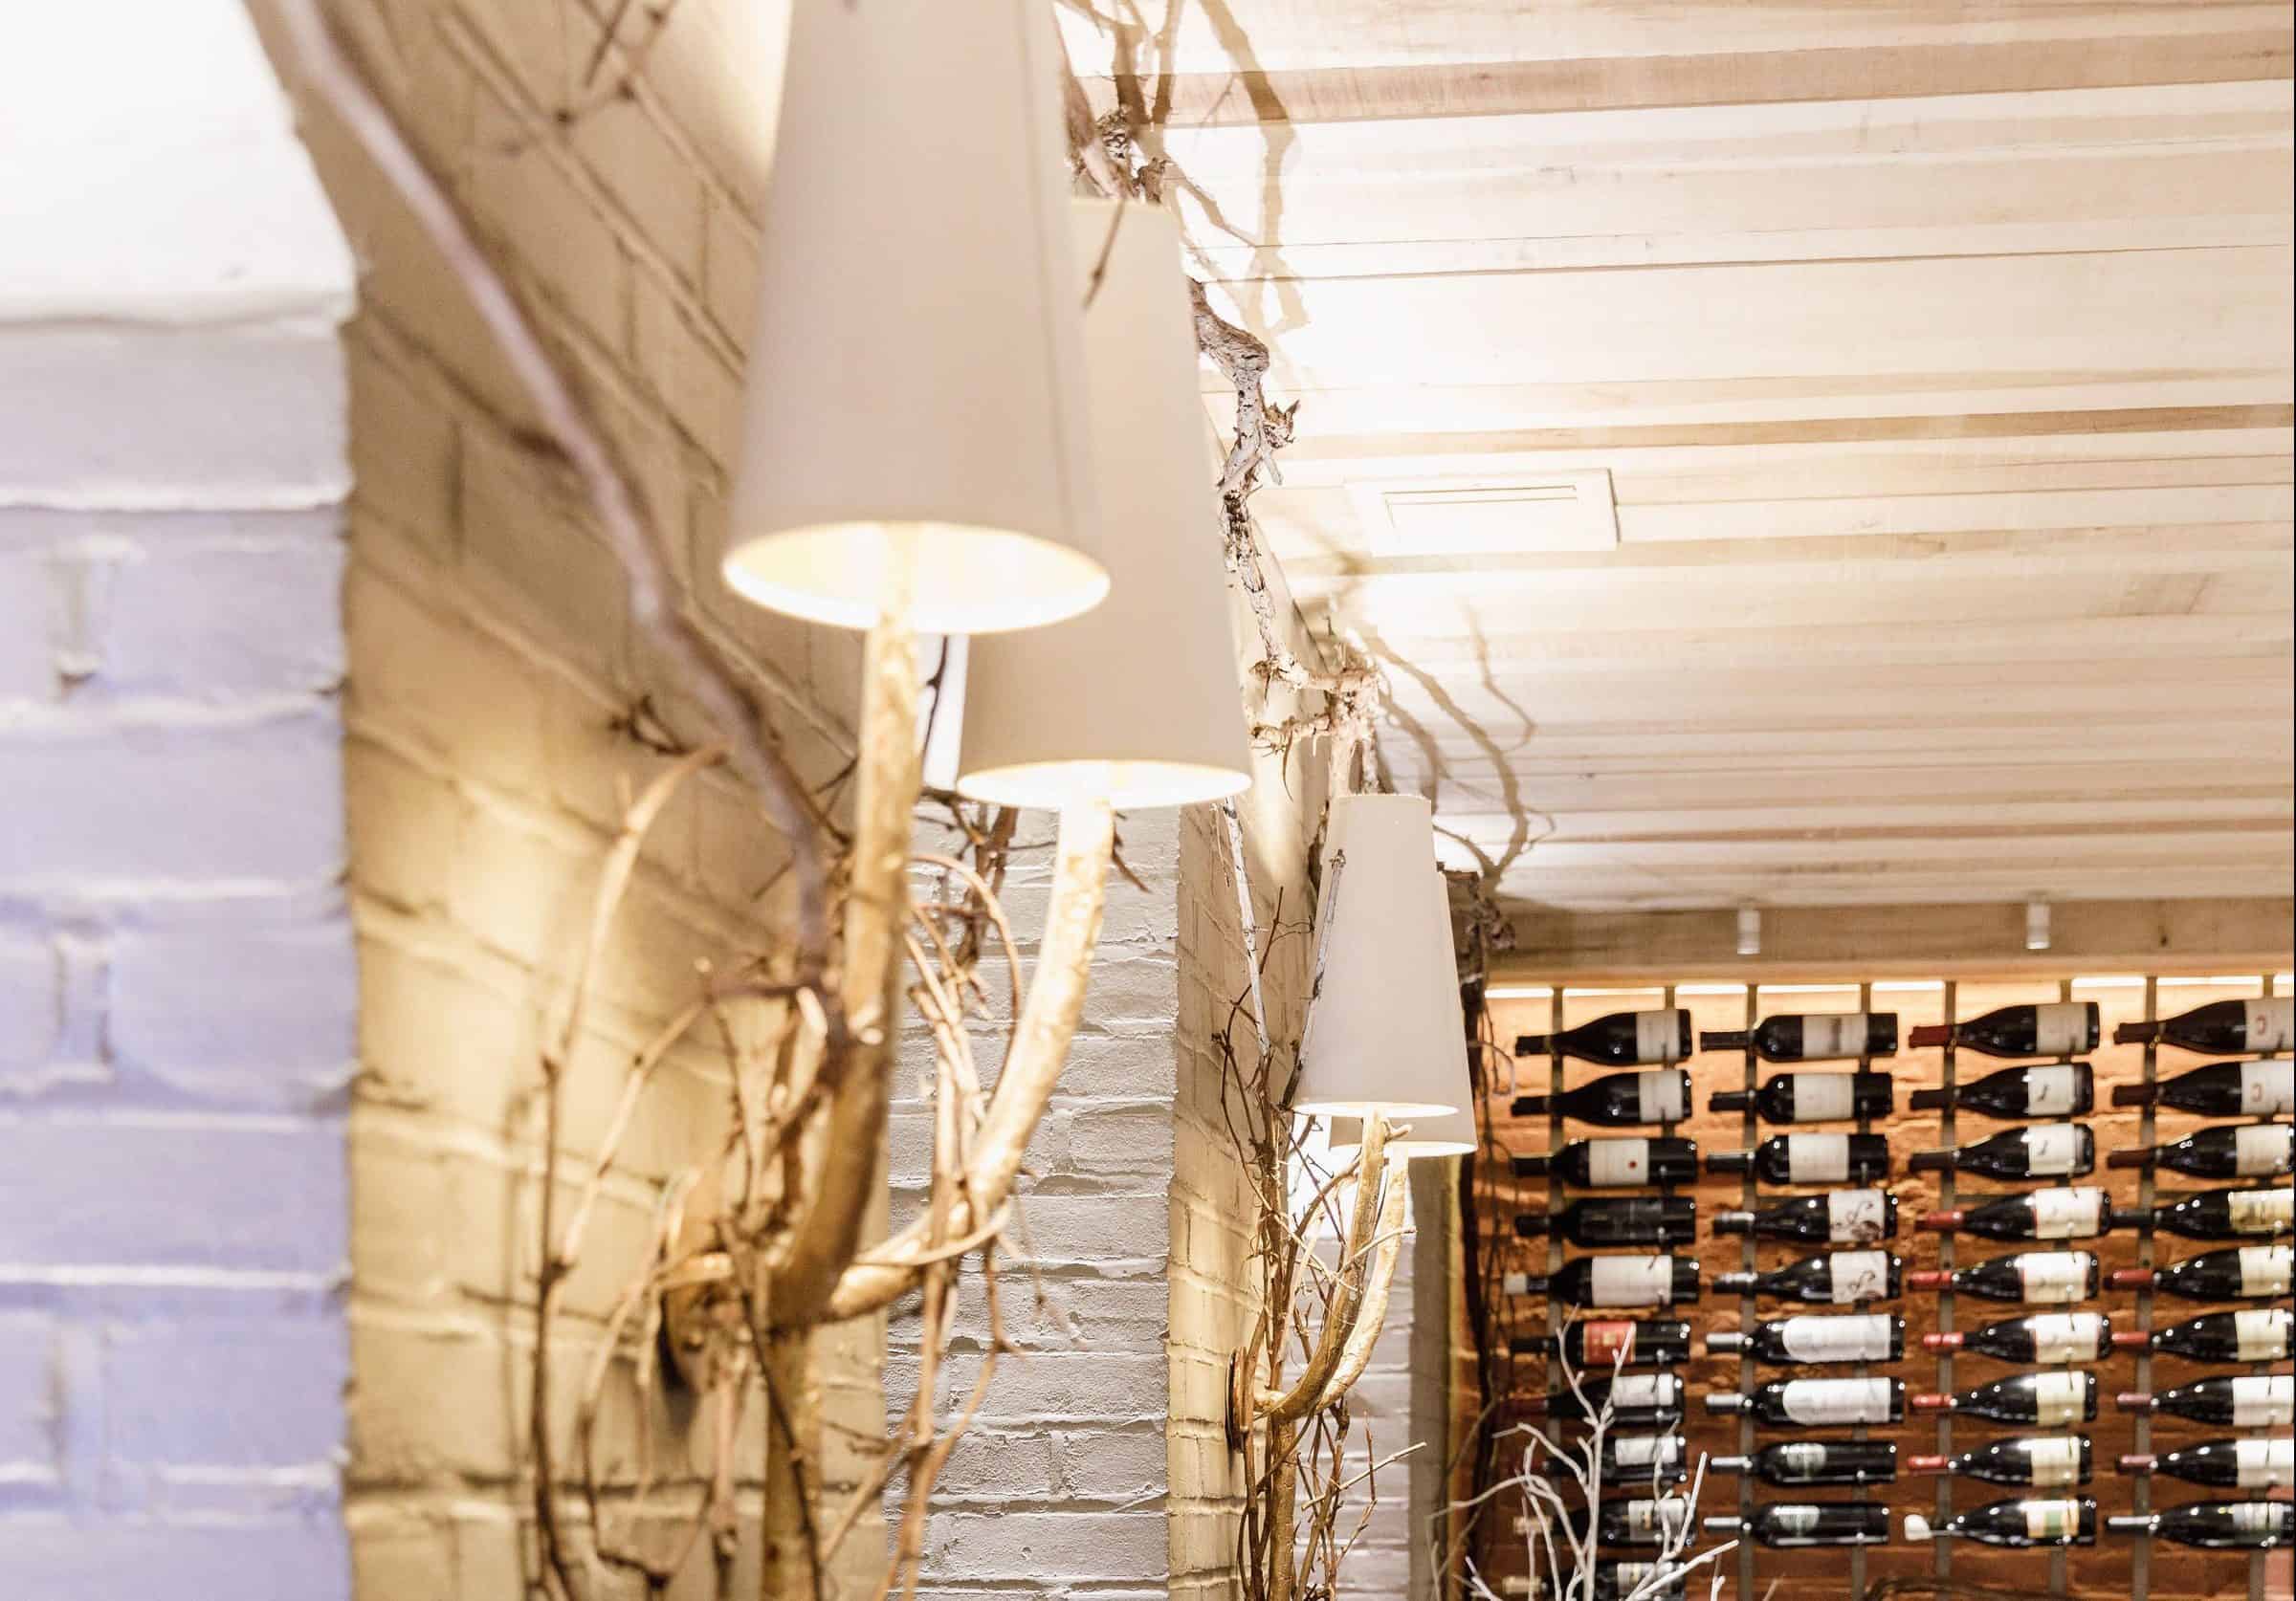 Wall sconces with rustic vines and wine racks in the Robert Parker Wine Cellar at Magdalena Restaurant.